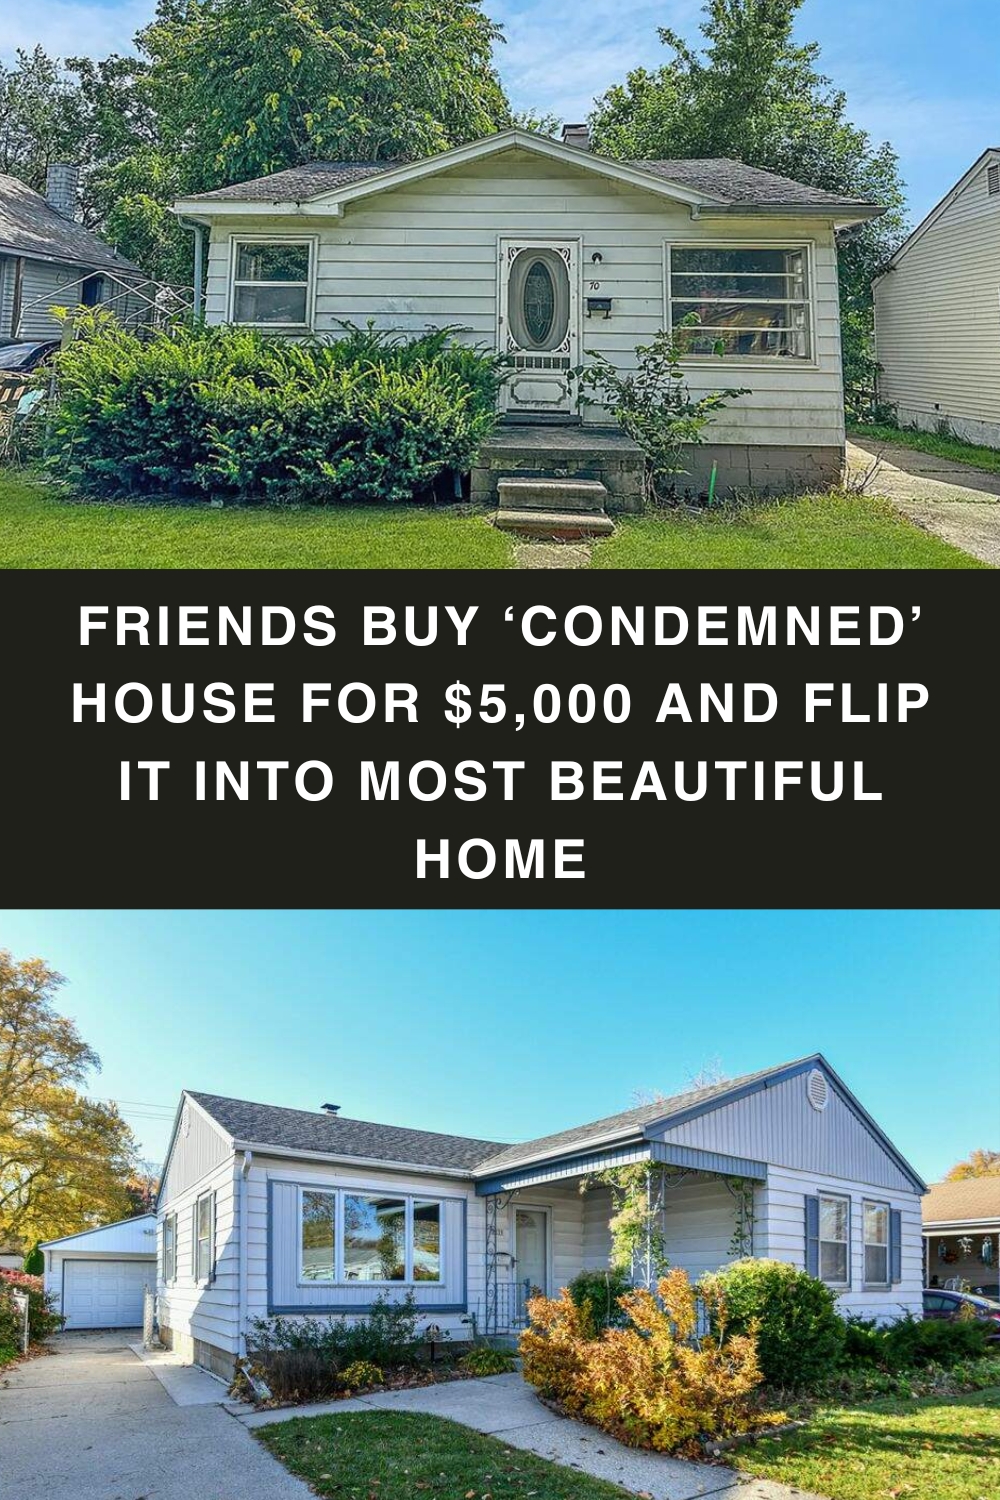 Friends buy ‘condemned’ house for $5,000 and flip it into most beautiful home pin